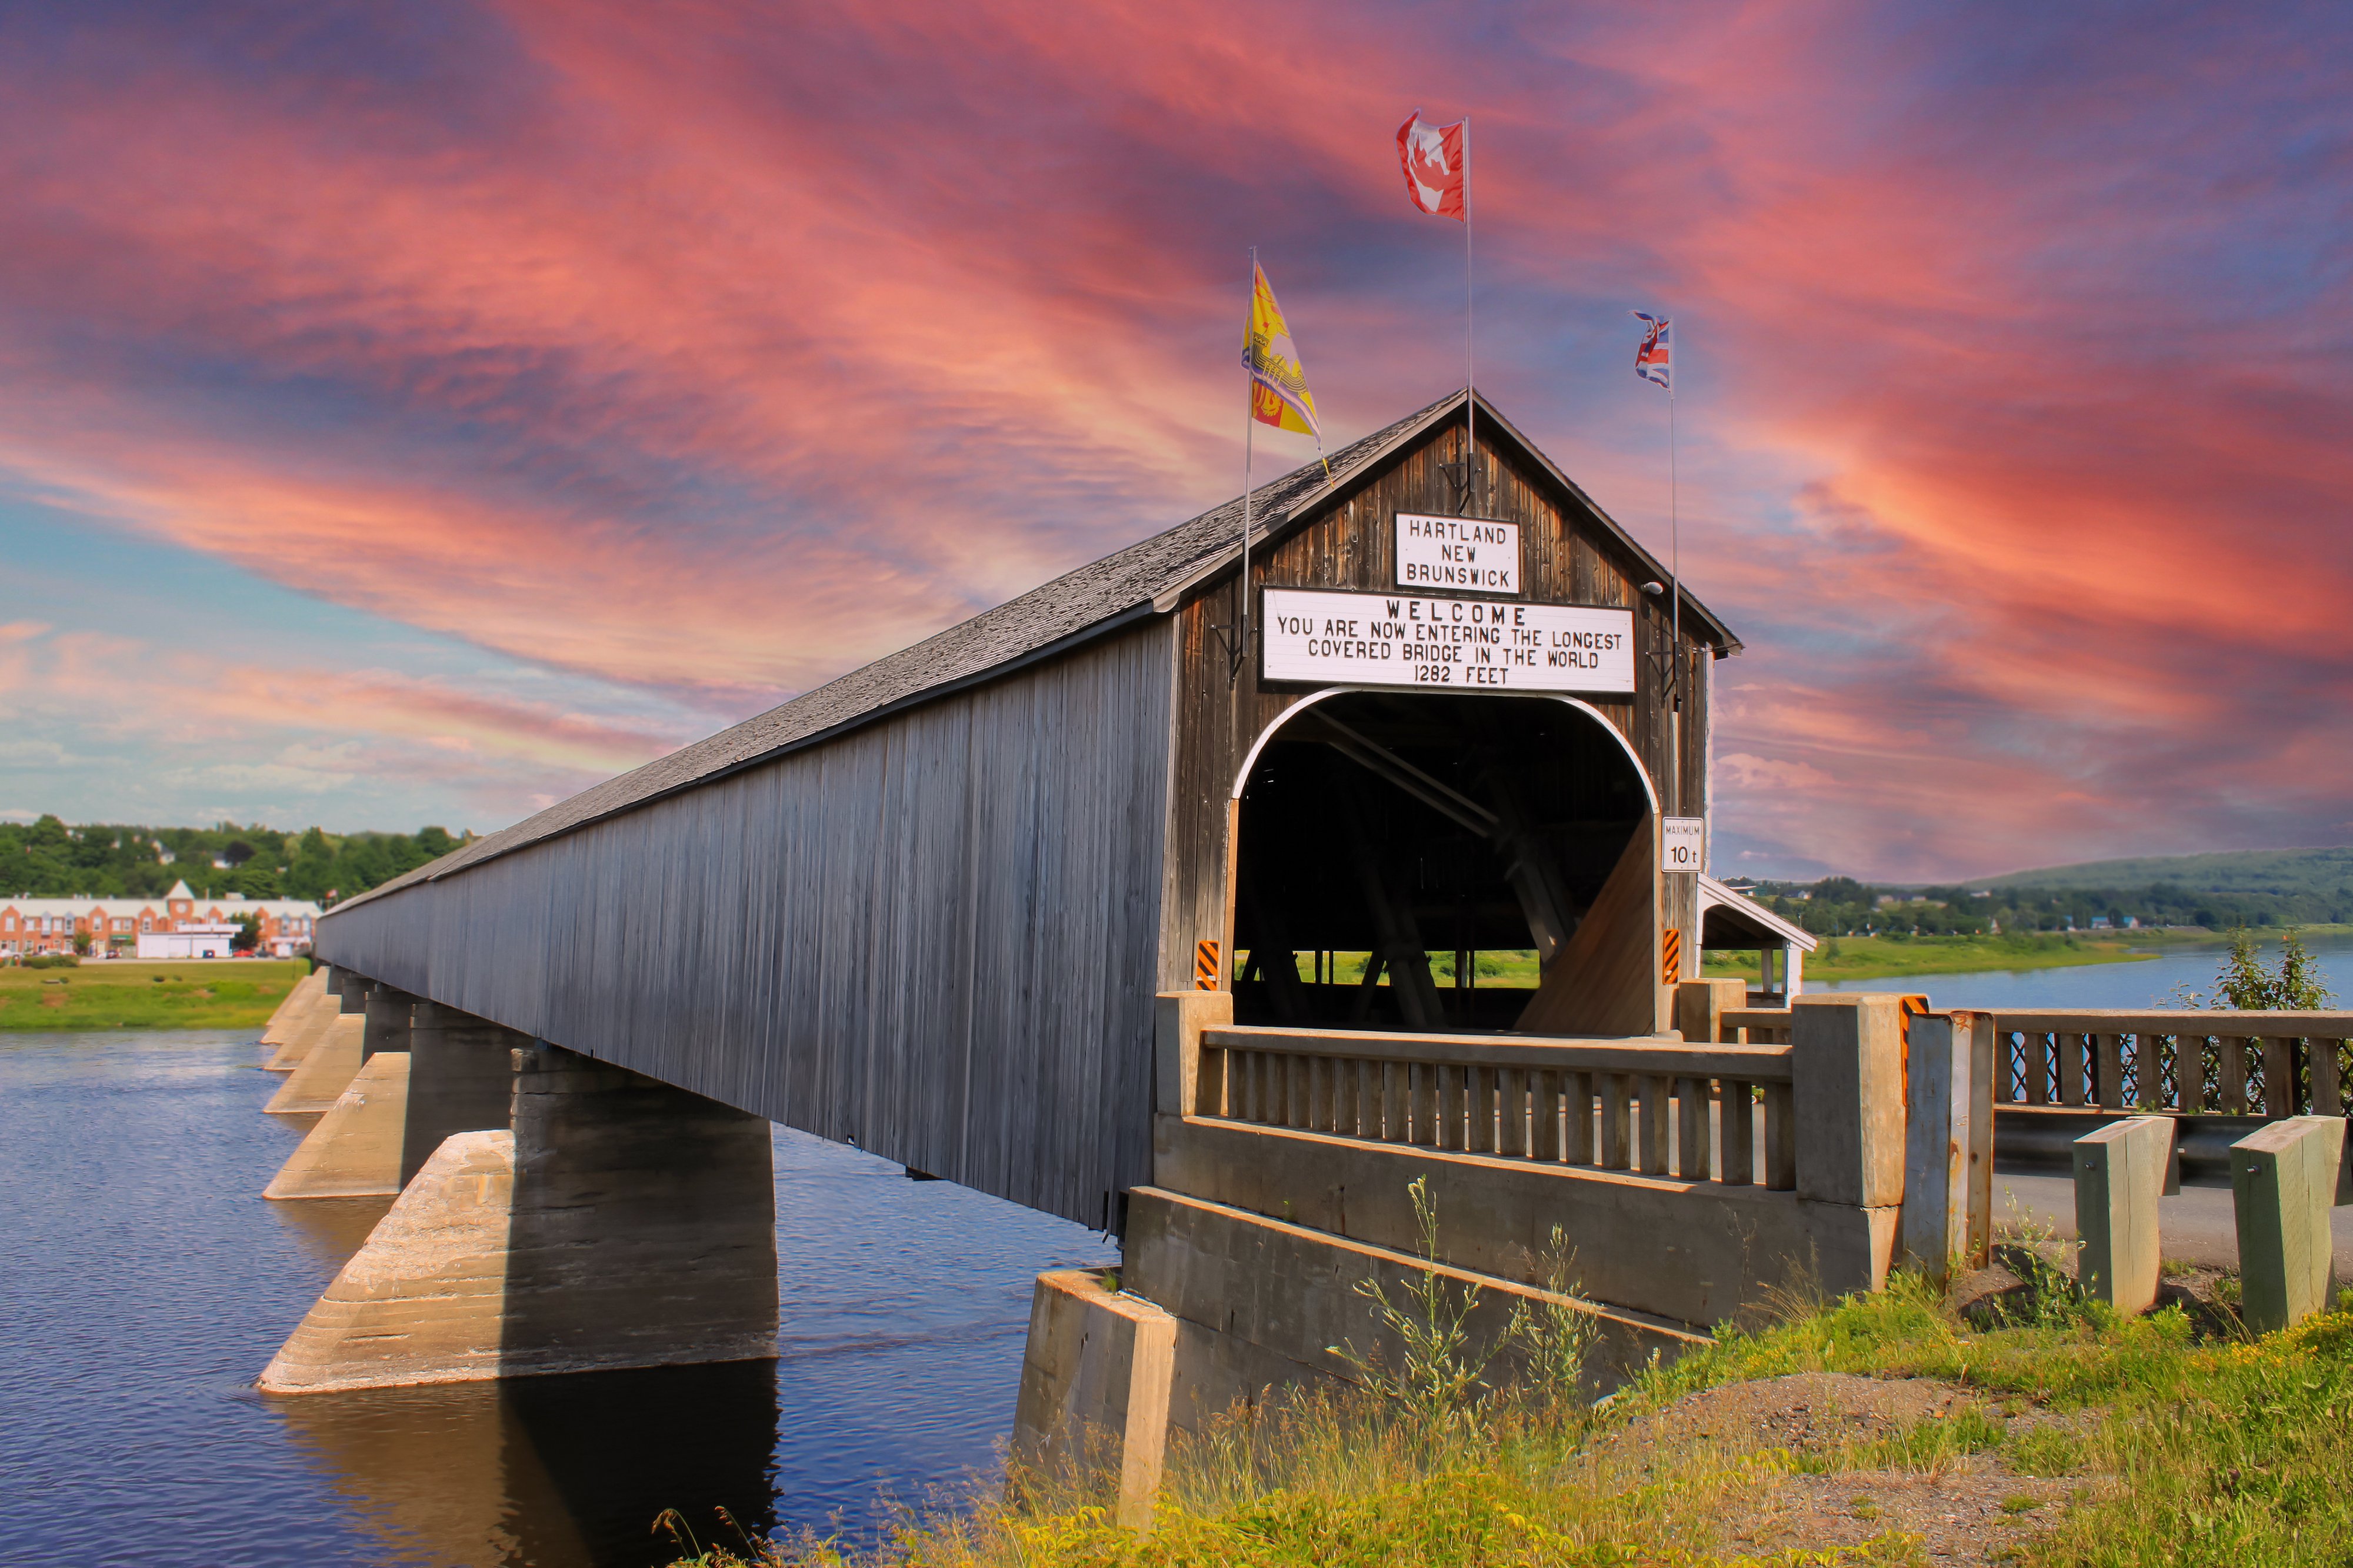 Canada on X: "If you're searching for the longest covered bridge in the  world, look no further! The Hartland Covered Bridge, spanning 390.75 metres  over the Saint John River in #NewBrunswick, is